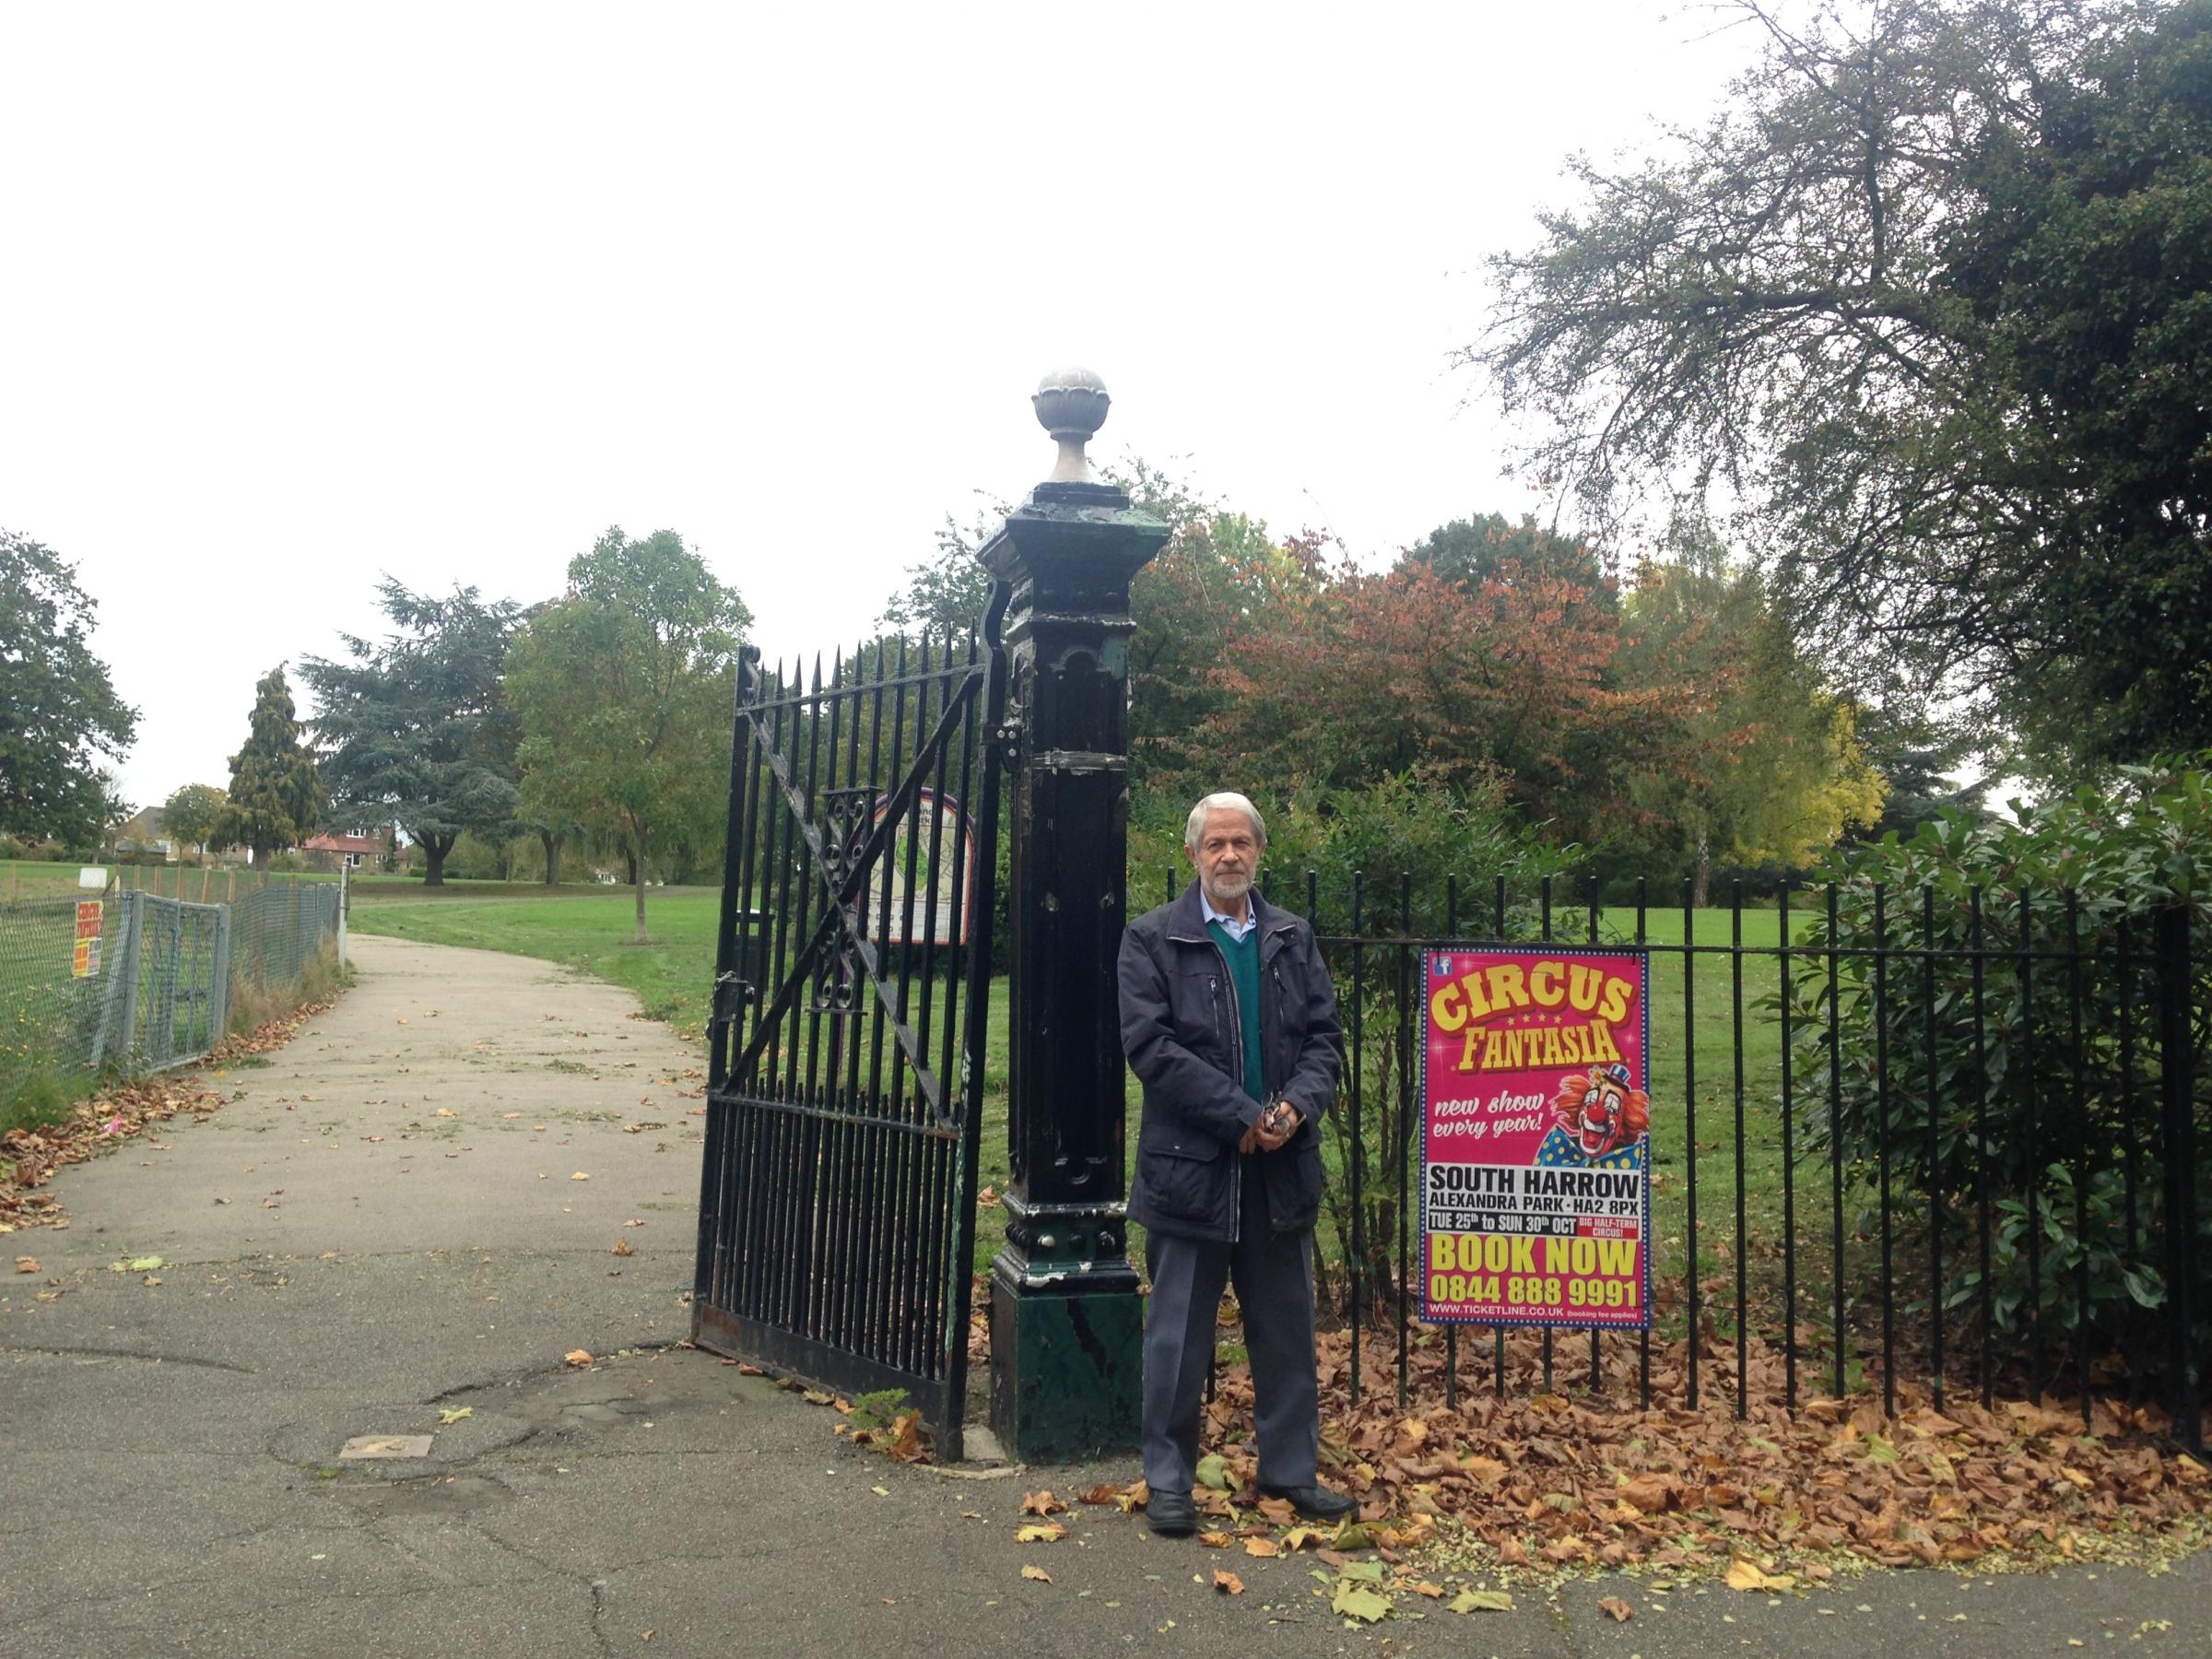 ‘It is the wrong park for a circus’ – neighbours fear half-term show could destroy community park